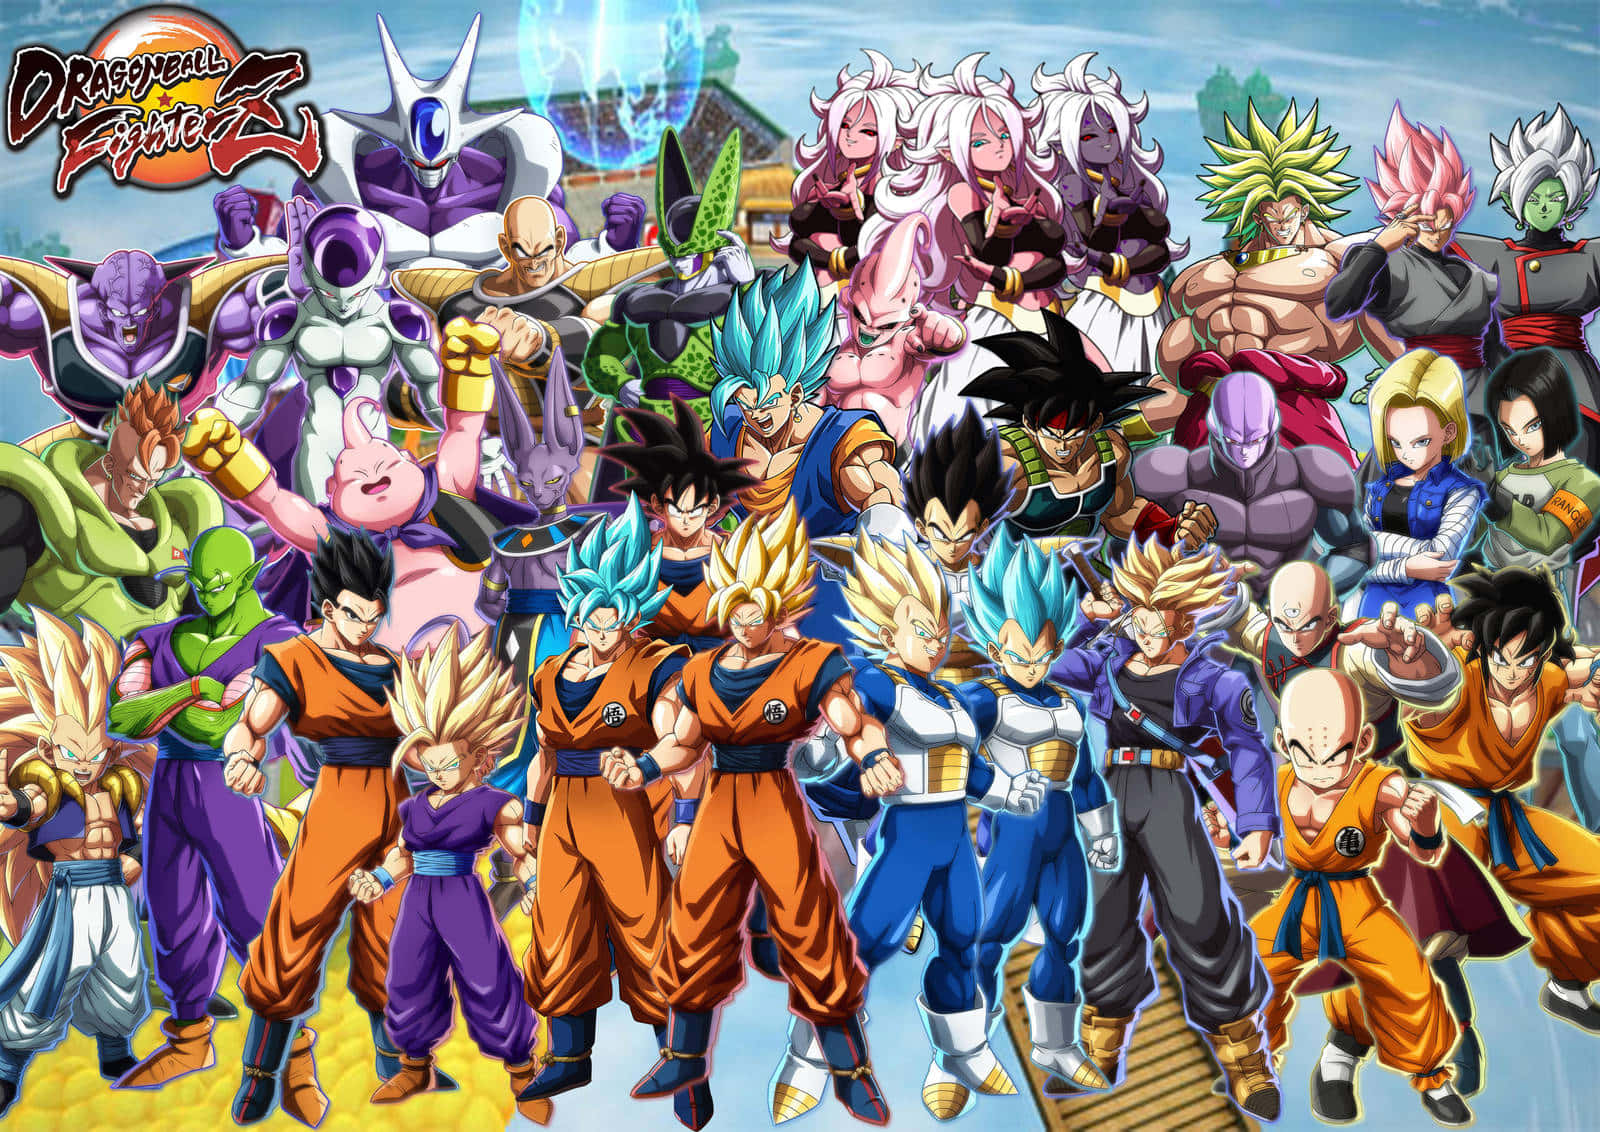 Powerful characters from the beloved anime franchise, 'Dragon Ball'" Wallpaper